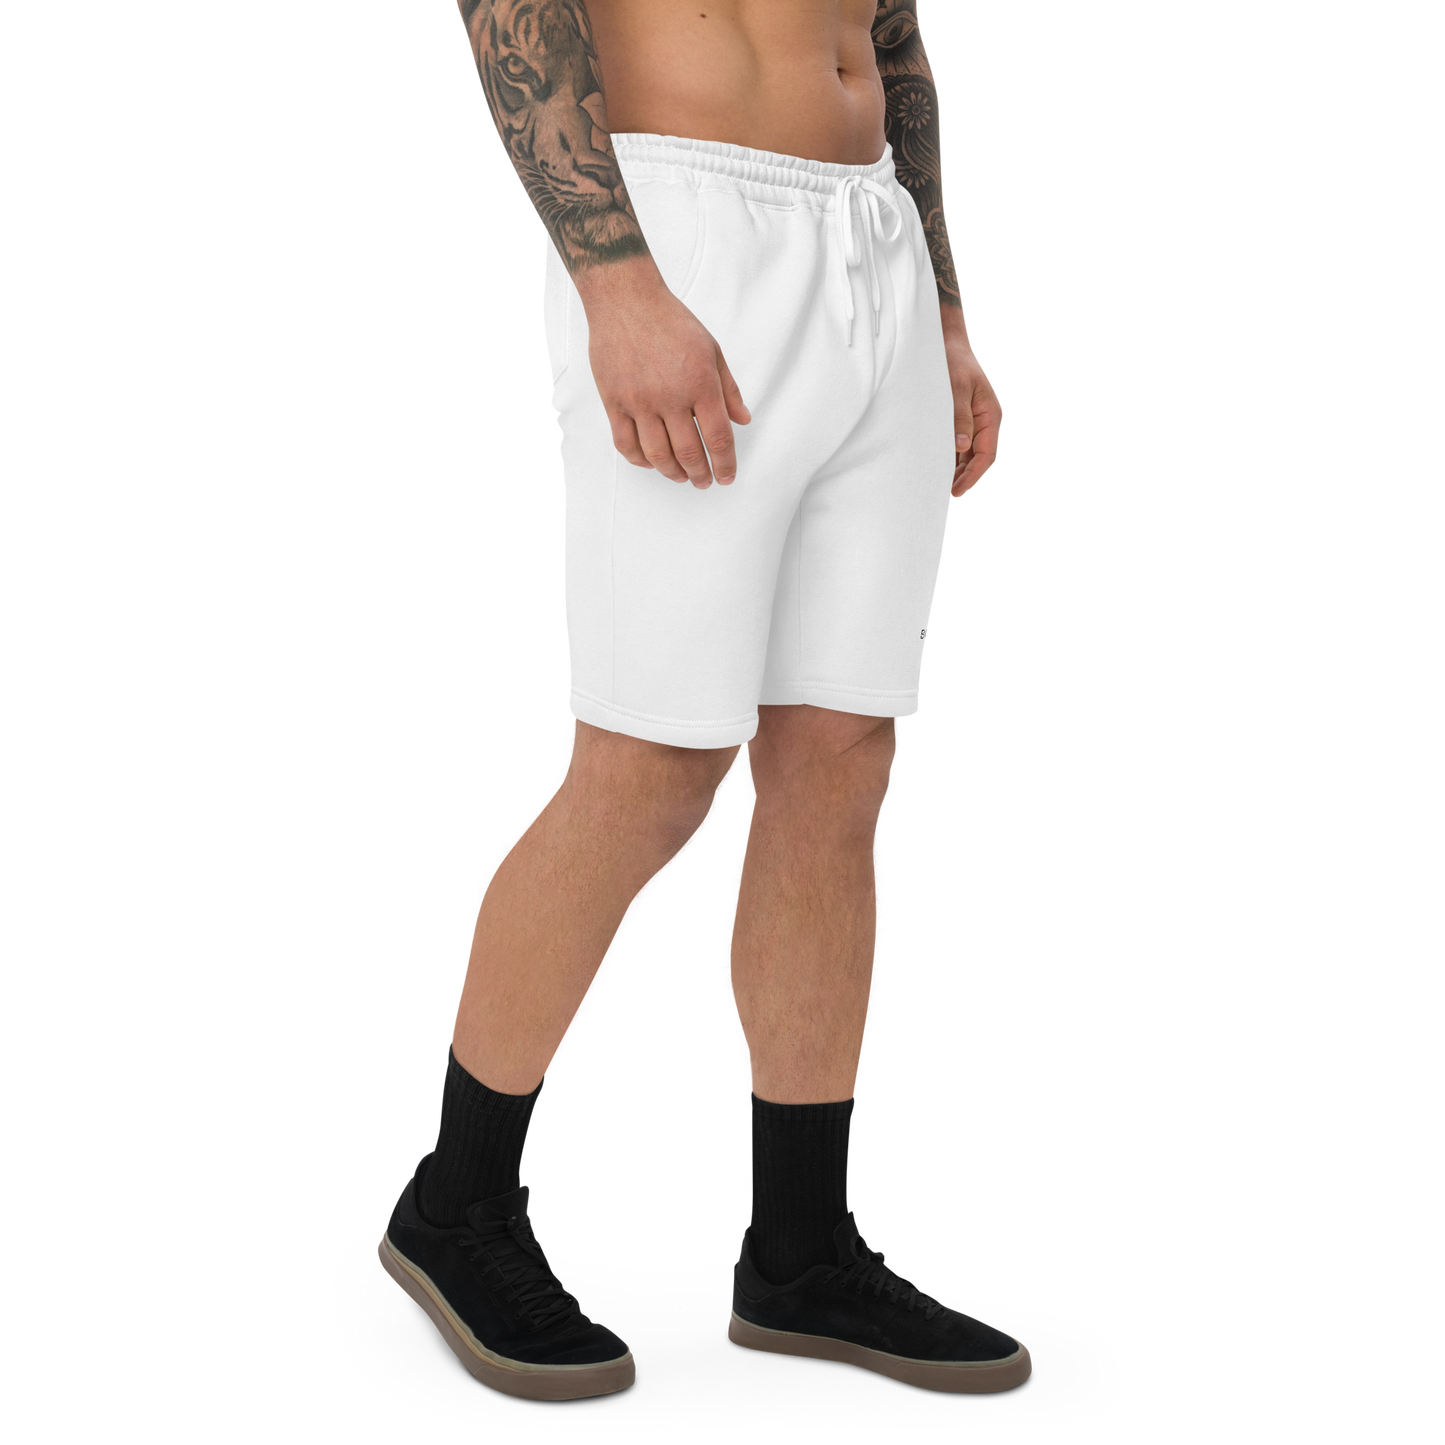 Man Wearing White Fleece Shorts featuring an embroidered Boozy Fox logo on front